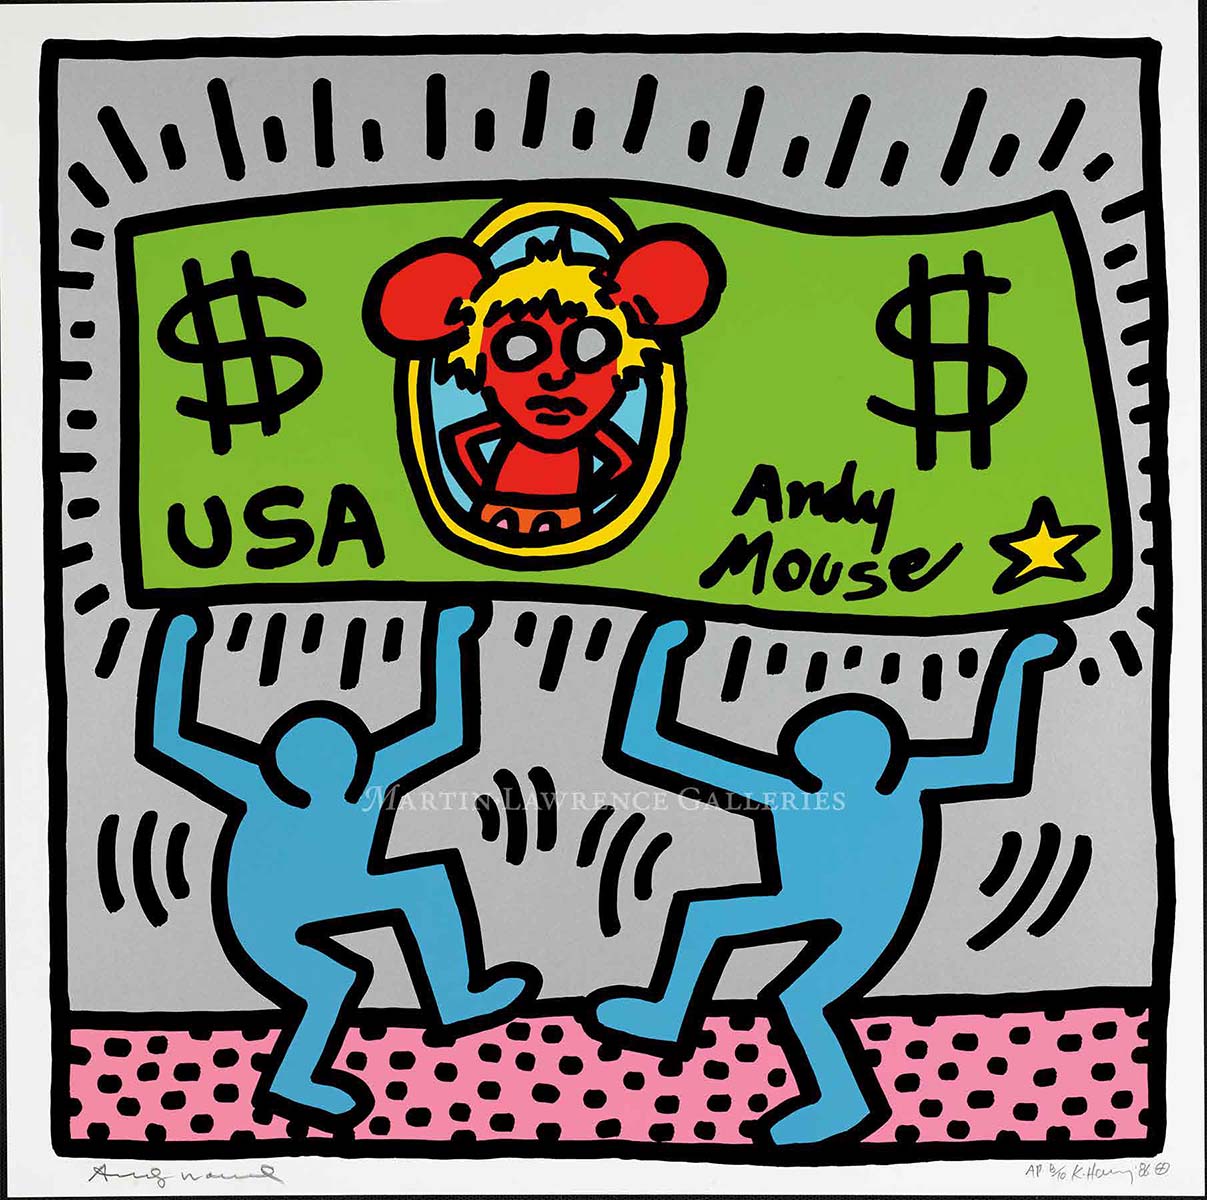 Keith_Haring_-_Andy_Mouse_1986_3?55853